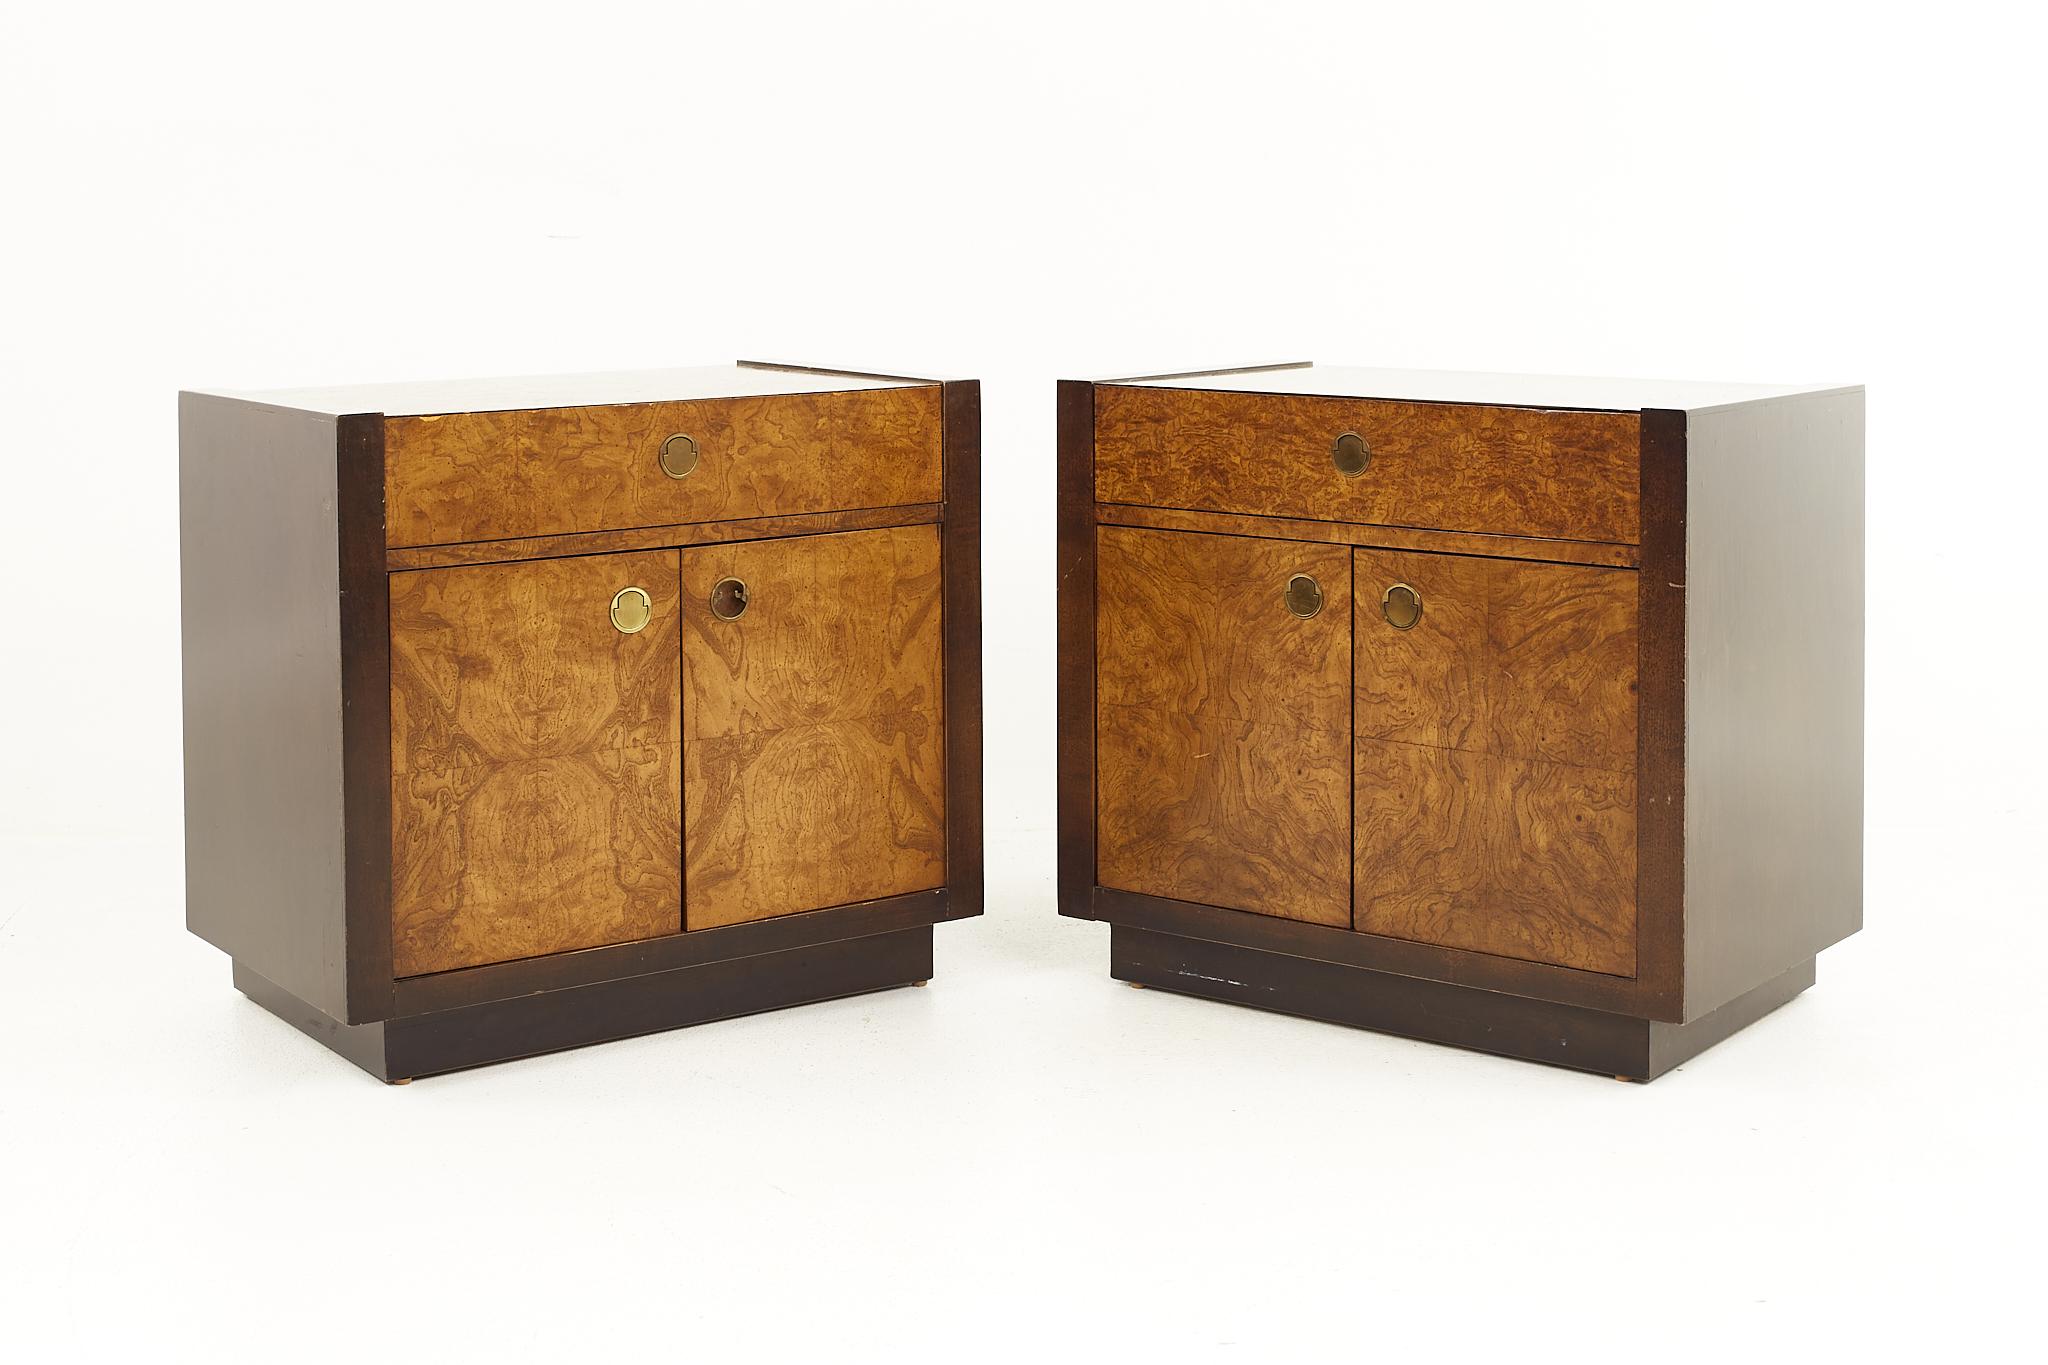 Milo Baughman style century furniture mid century burlwood nightstand - a pair

Each nightstand measures: 26 wide x 16 deep x 23.5 inches high

All pieces of furniture can be had in what we call restored vintage condition. That means the piece